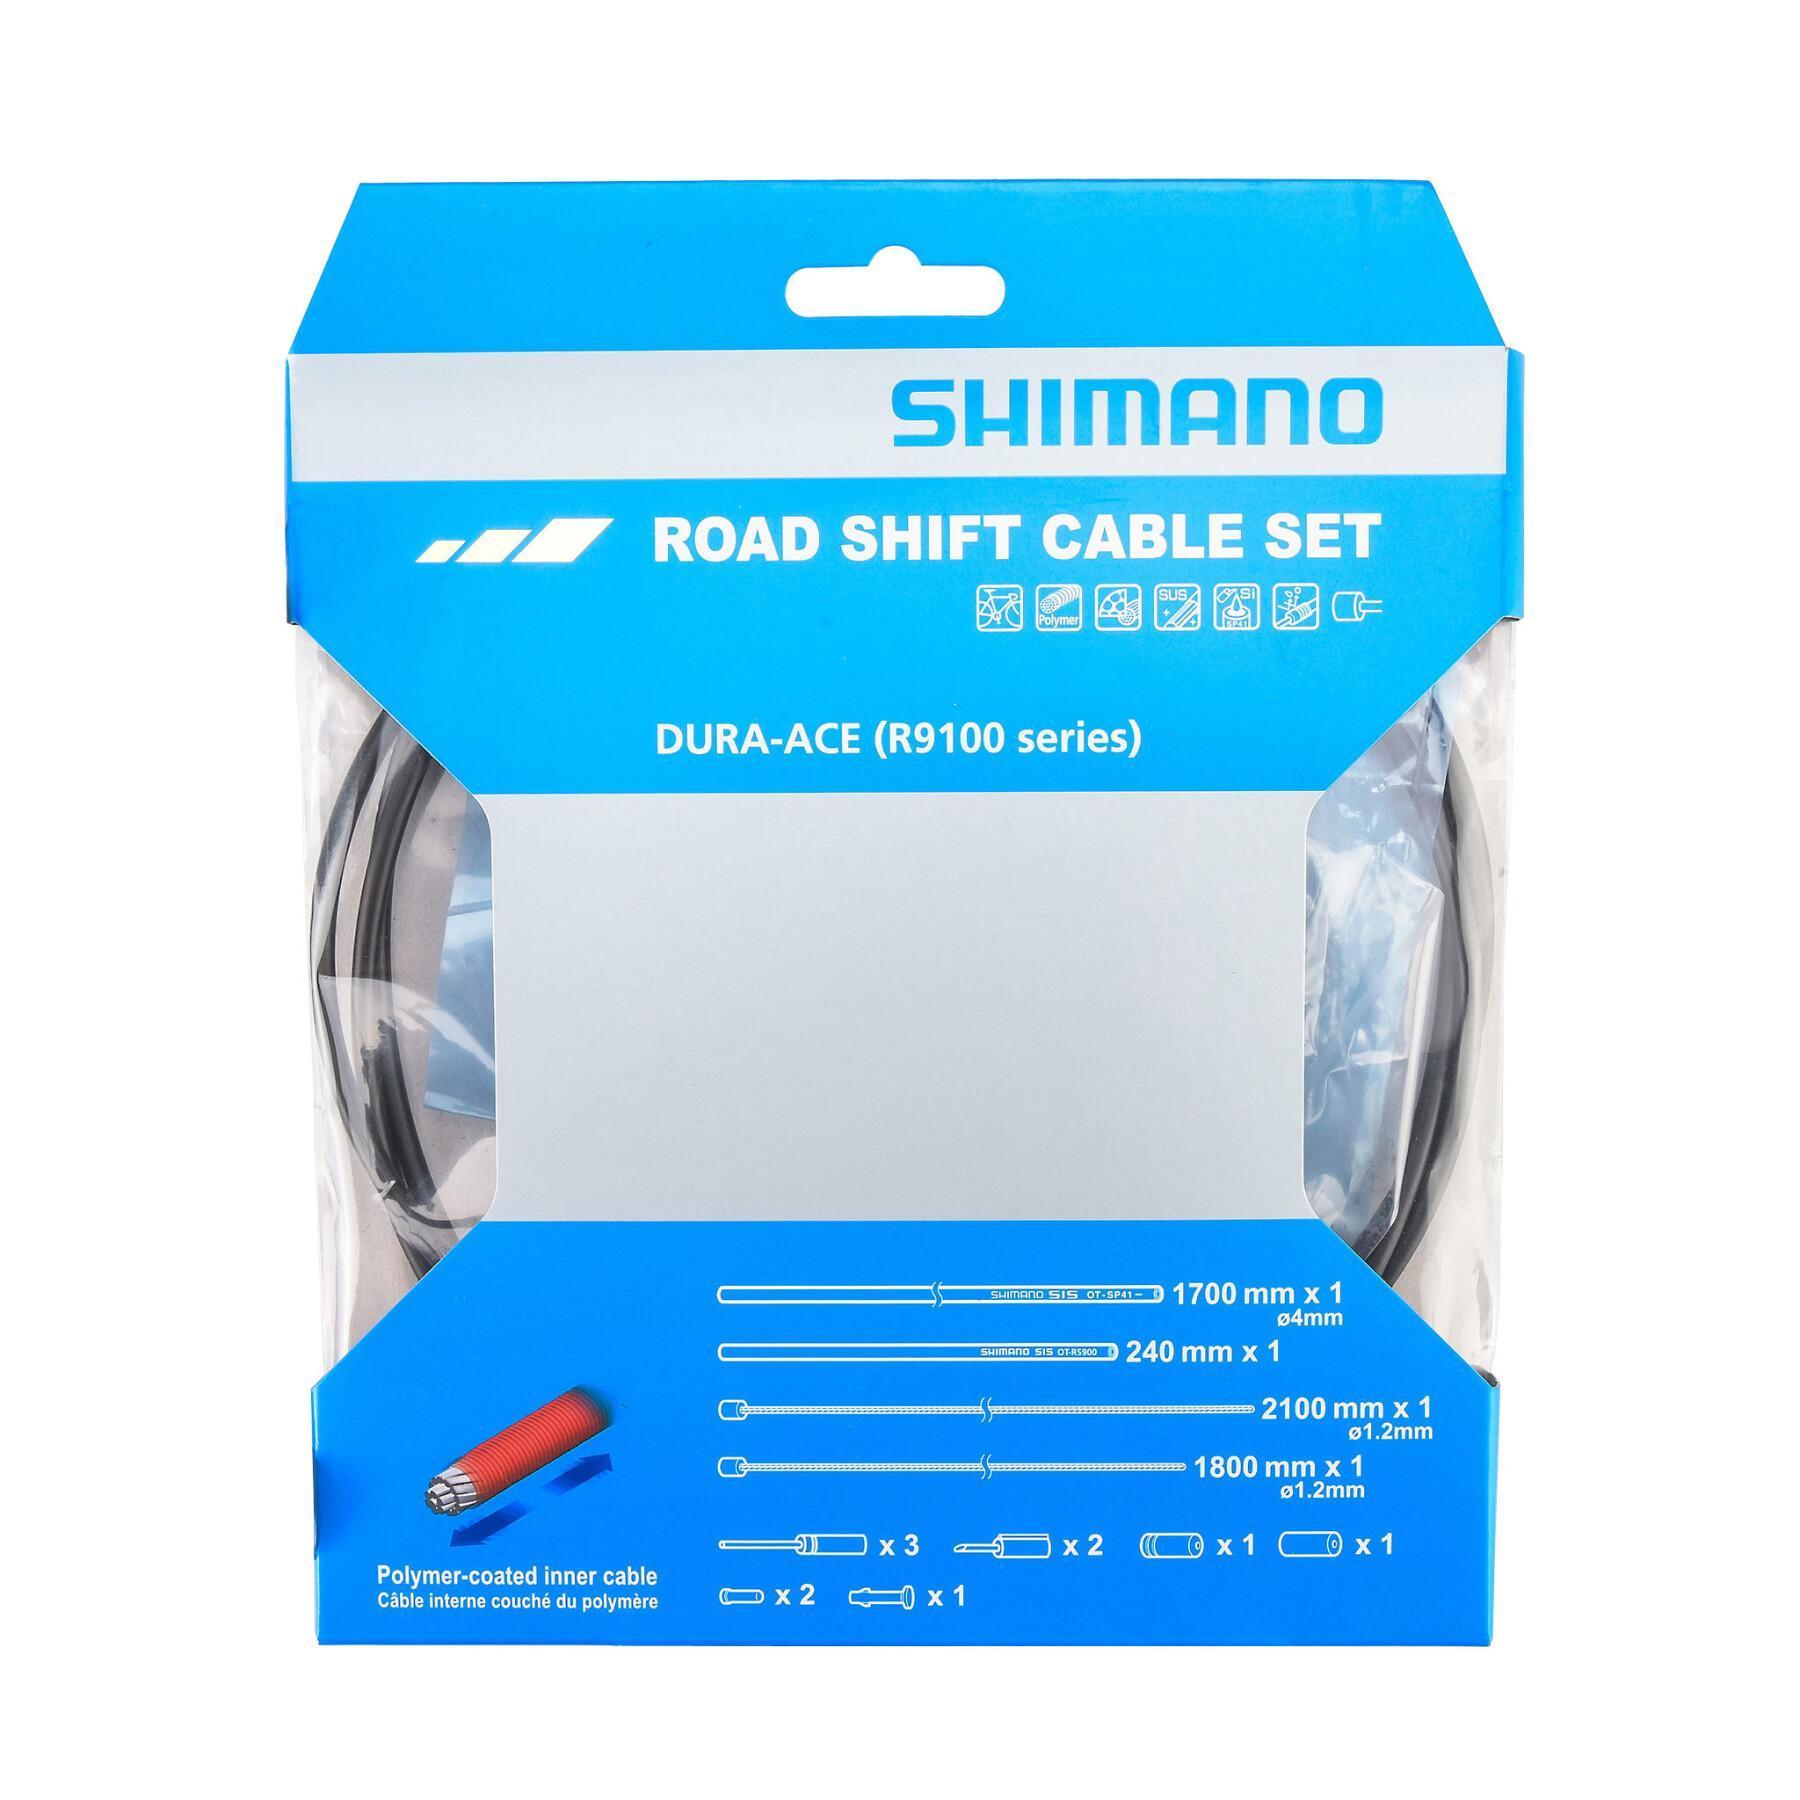 Polymer-coated cable sets and gear shift covers Shimano